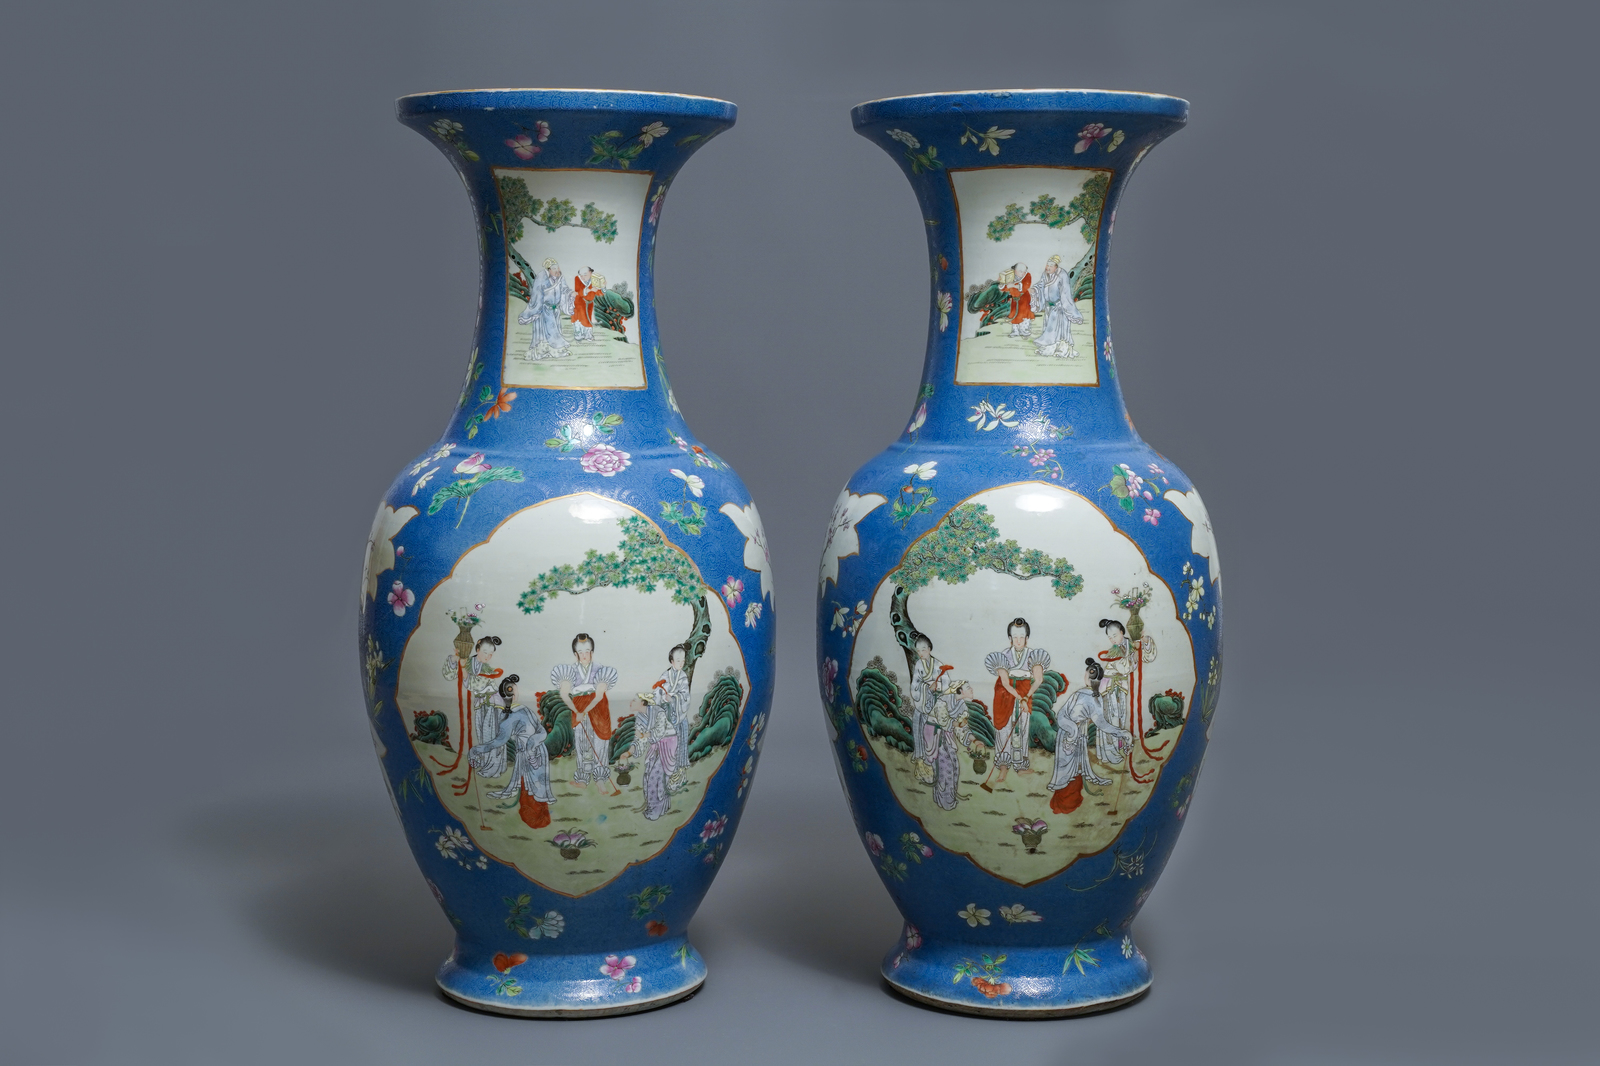 A pair of large Chinese blue-ground famille rose vases with figural design, Qianlong mark, 19th C. - Image 3 of 6